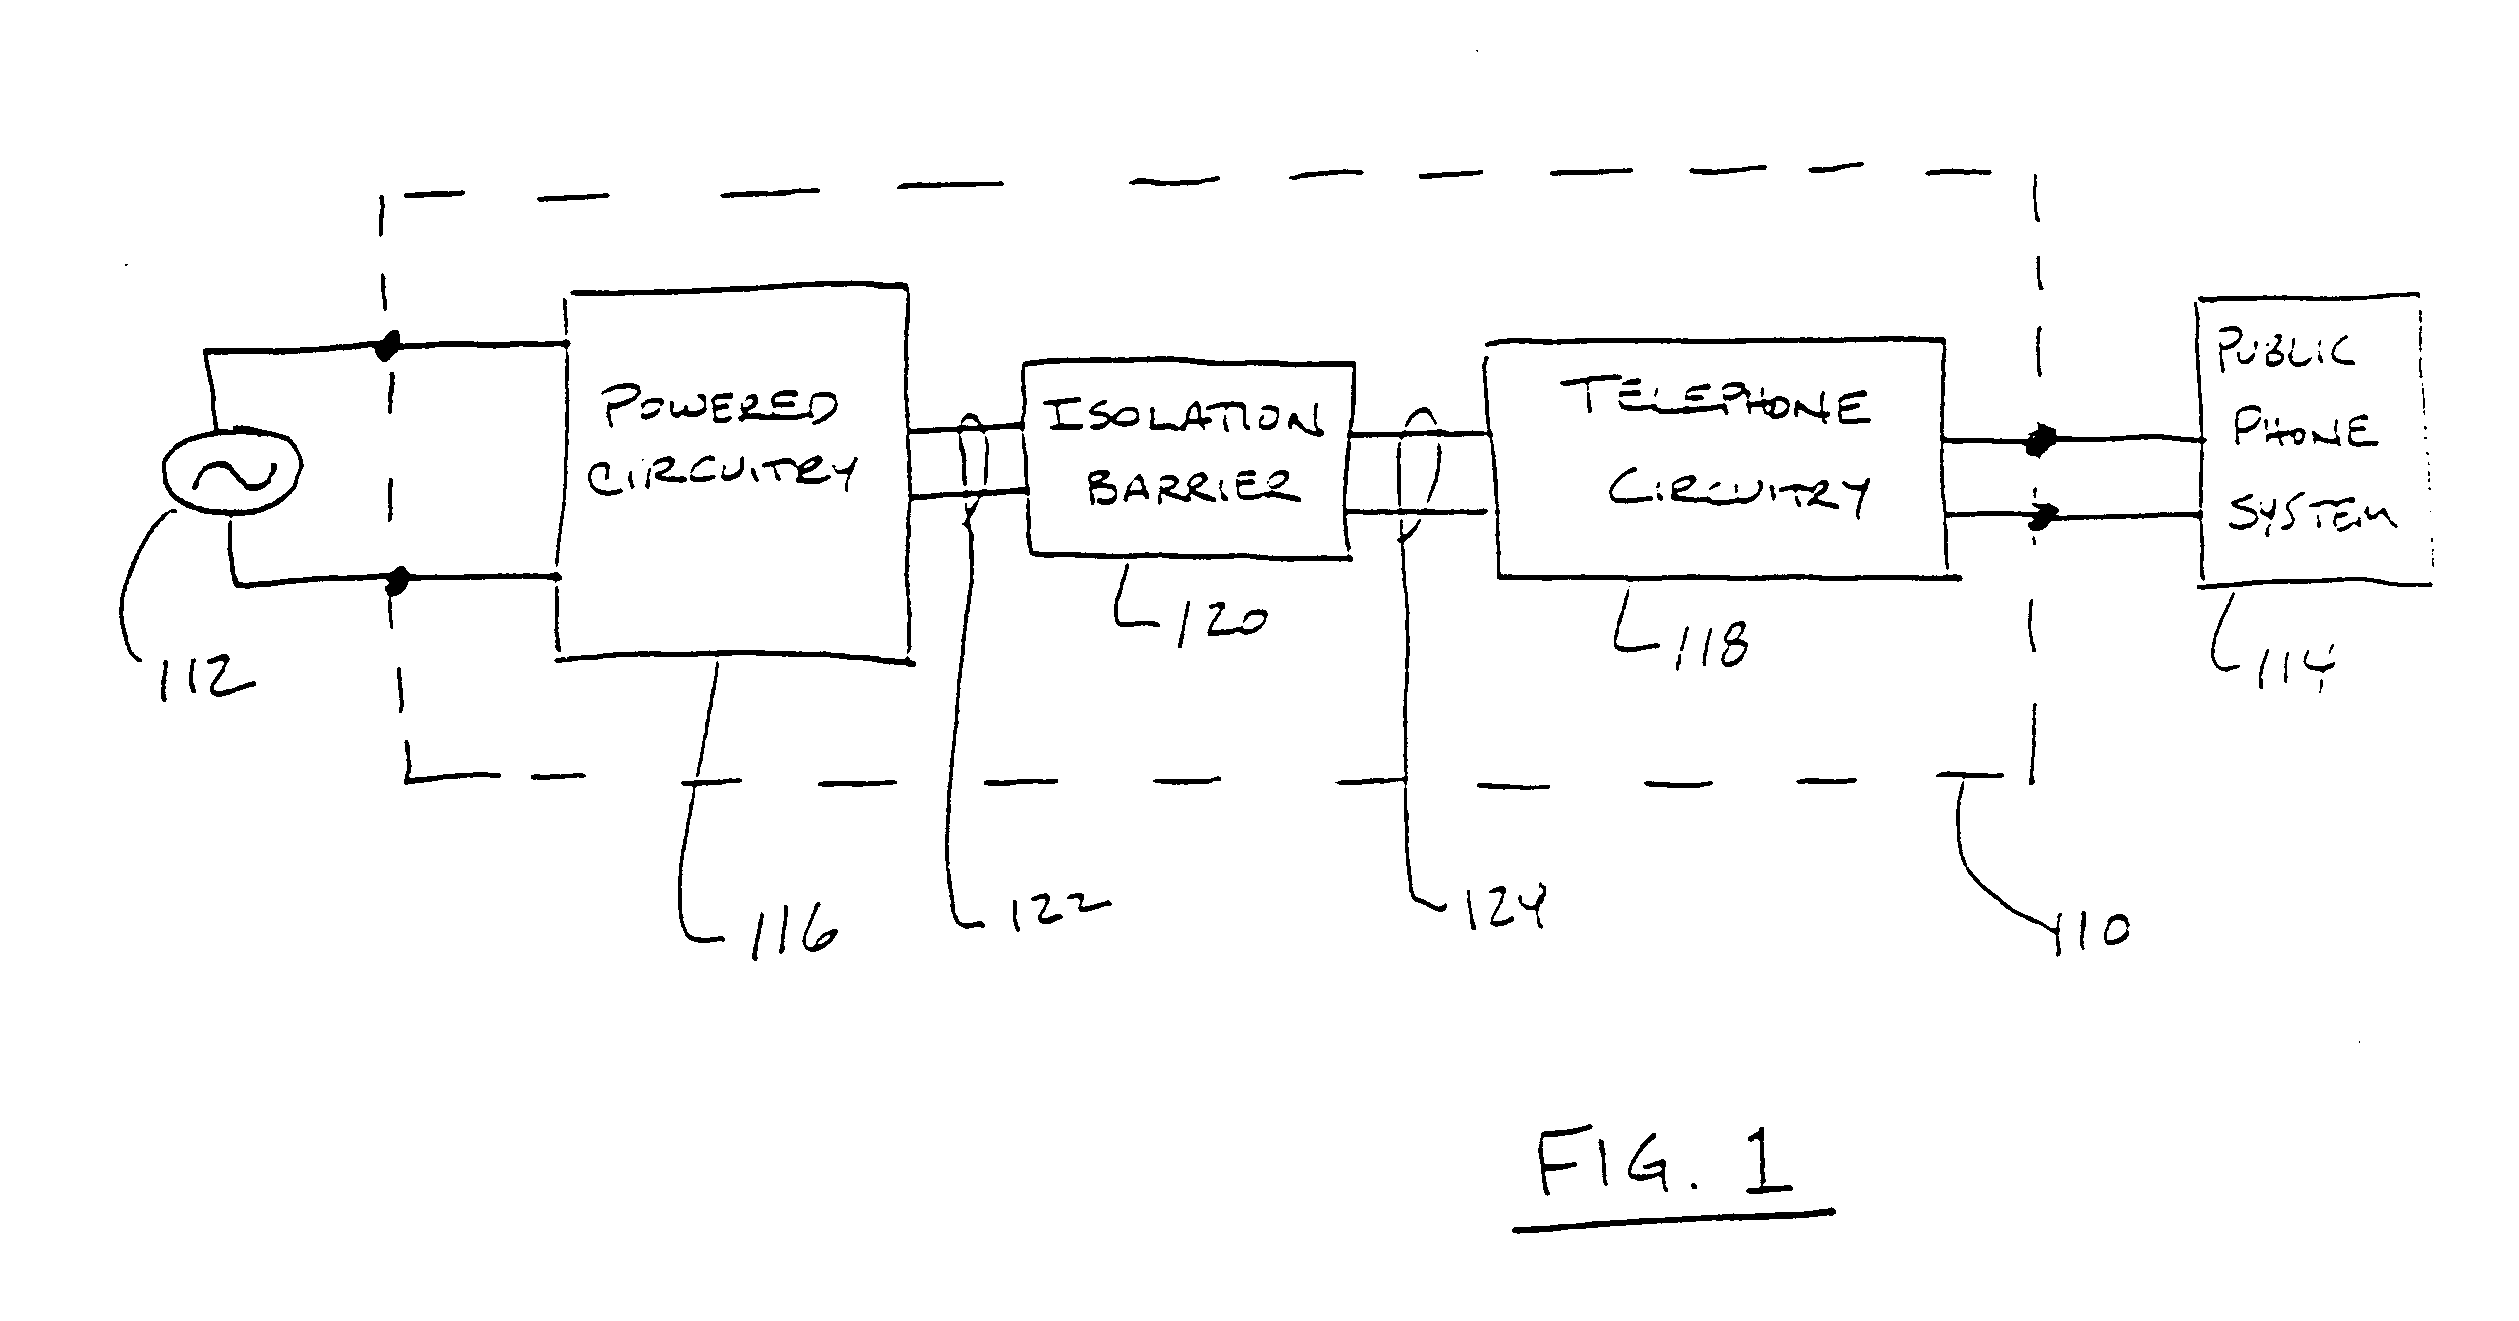 Digital isolation system with ADC offset calibration